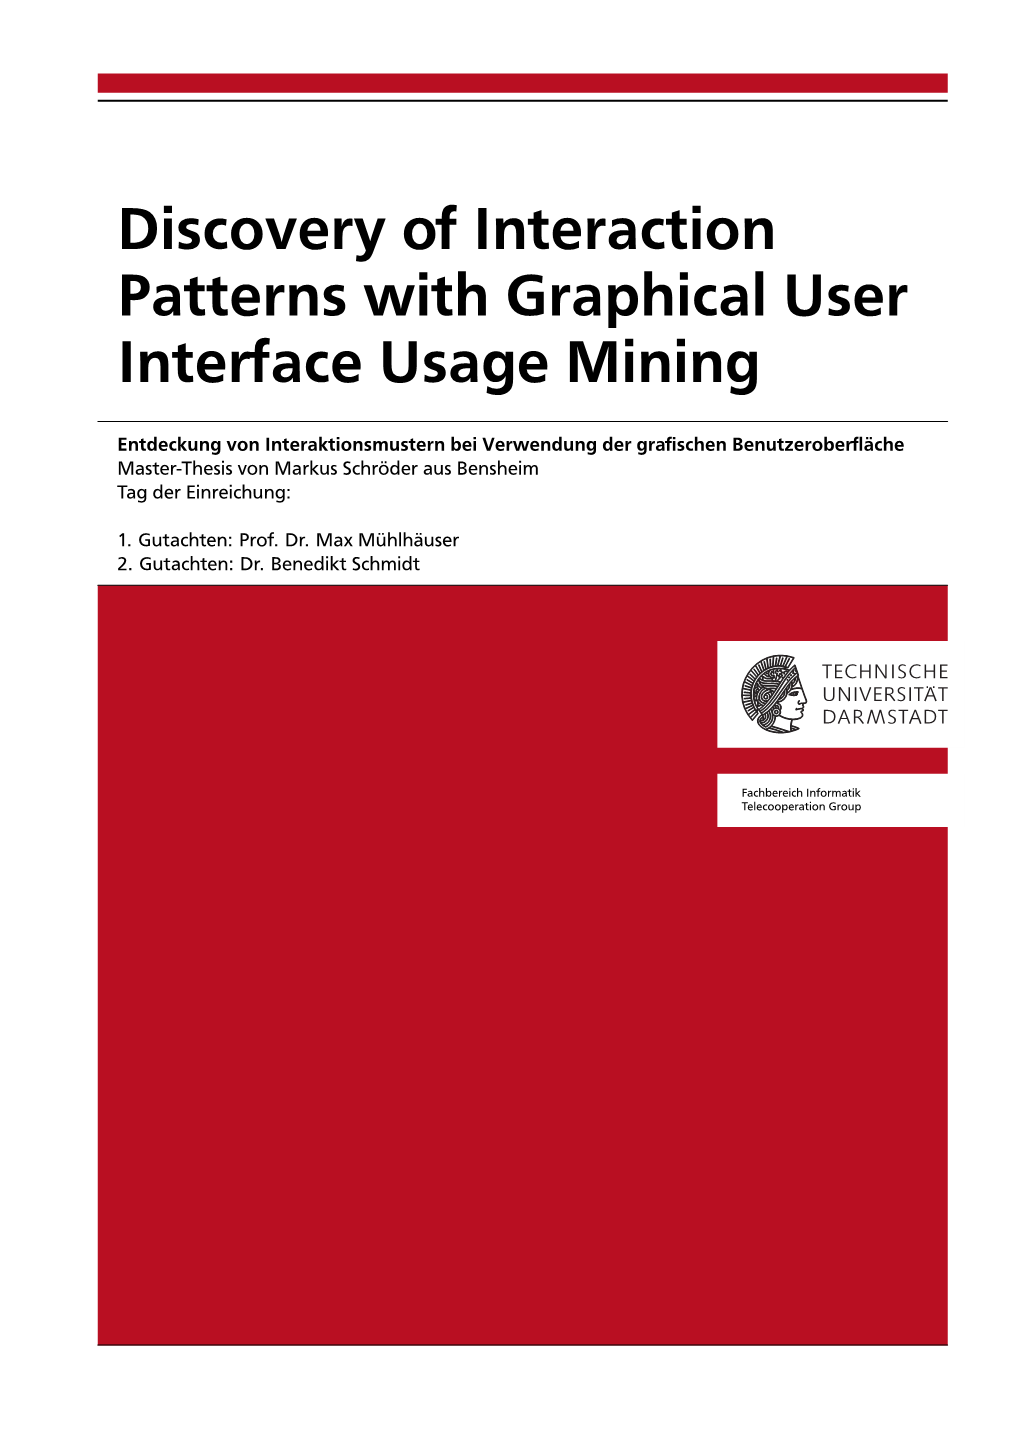 Discovery of Interaction Patterns with Graphical User Interface Usage Mining